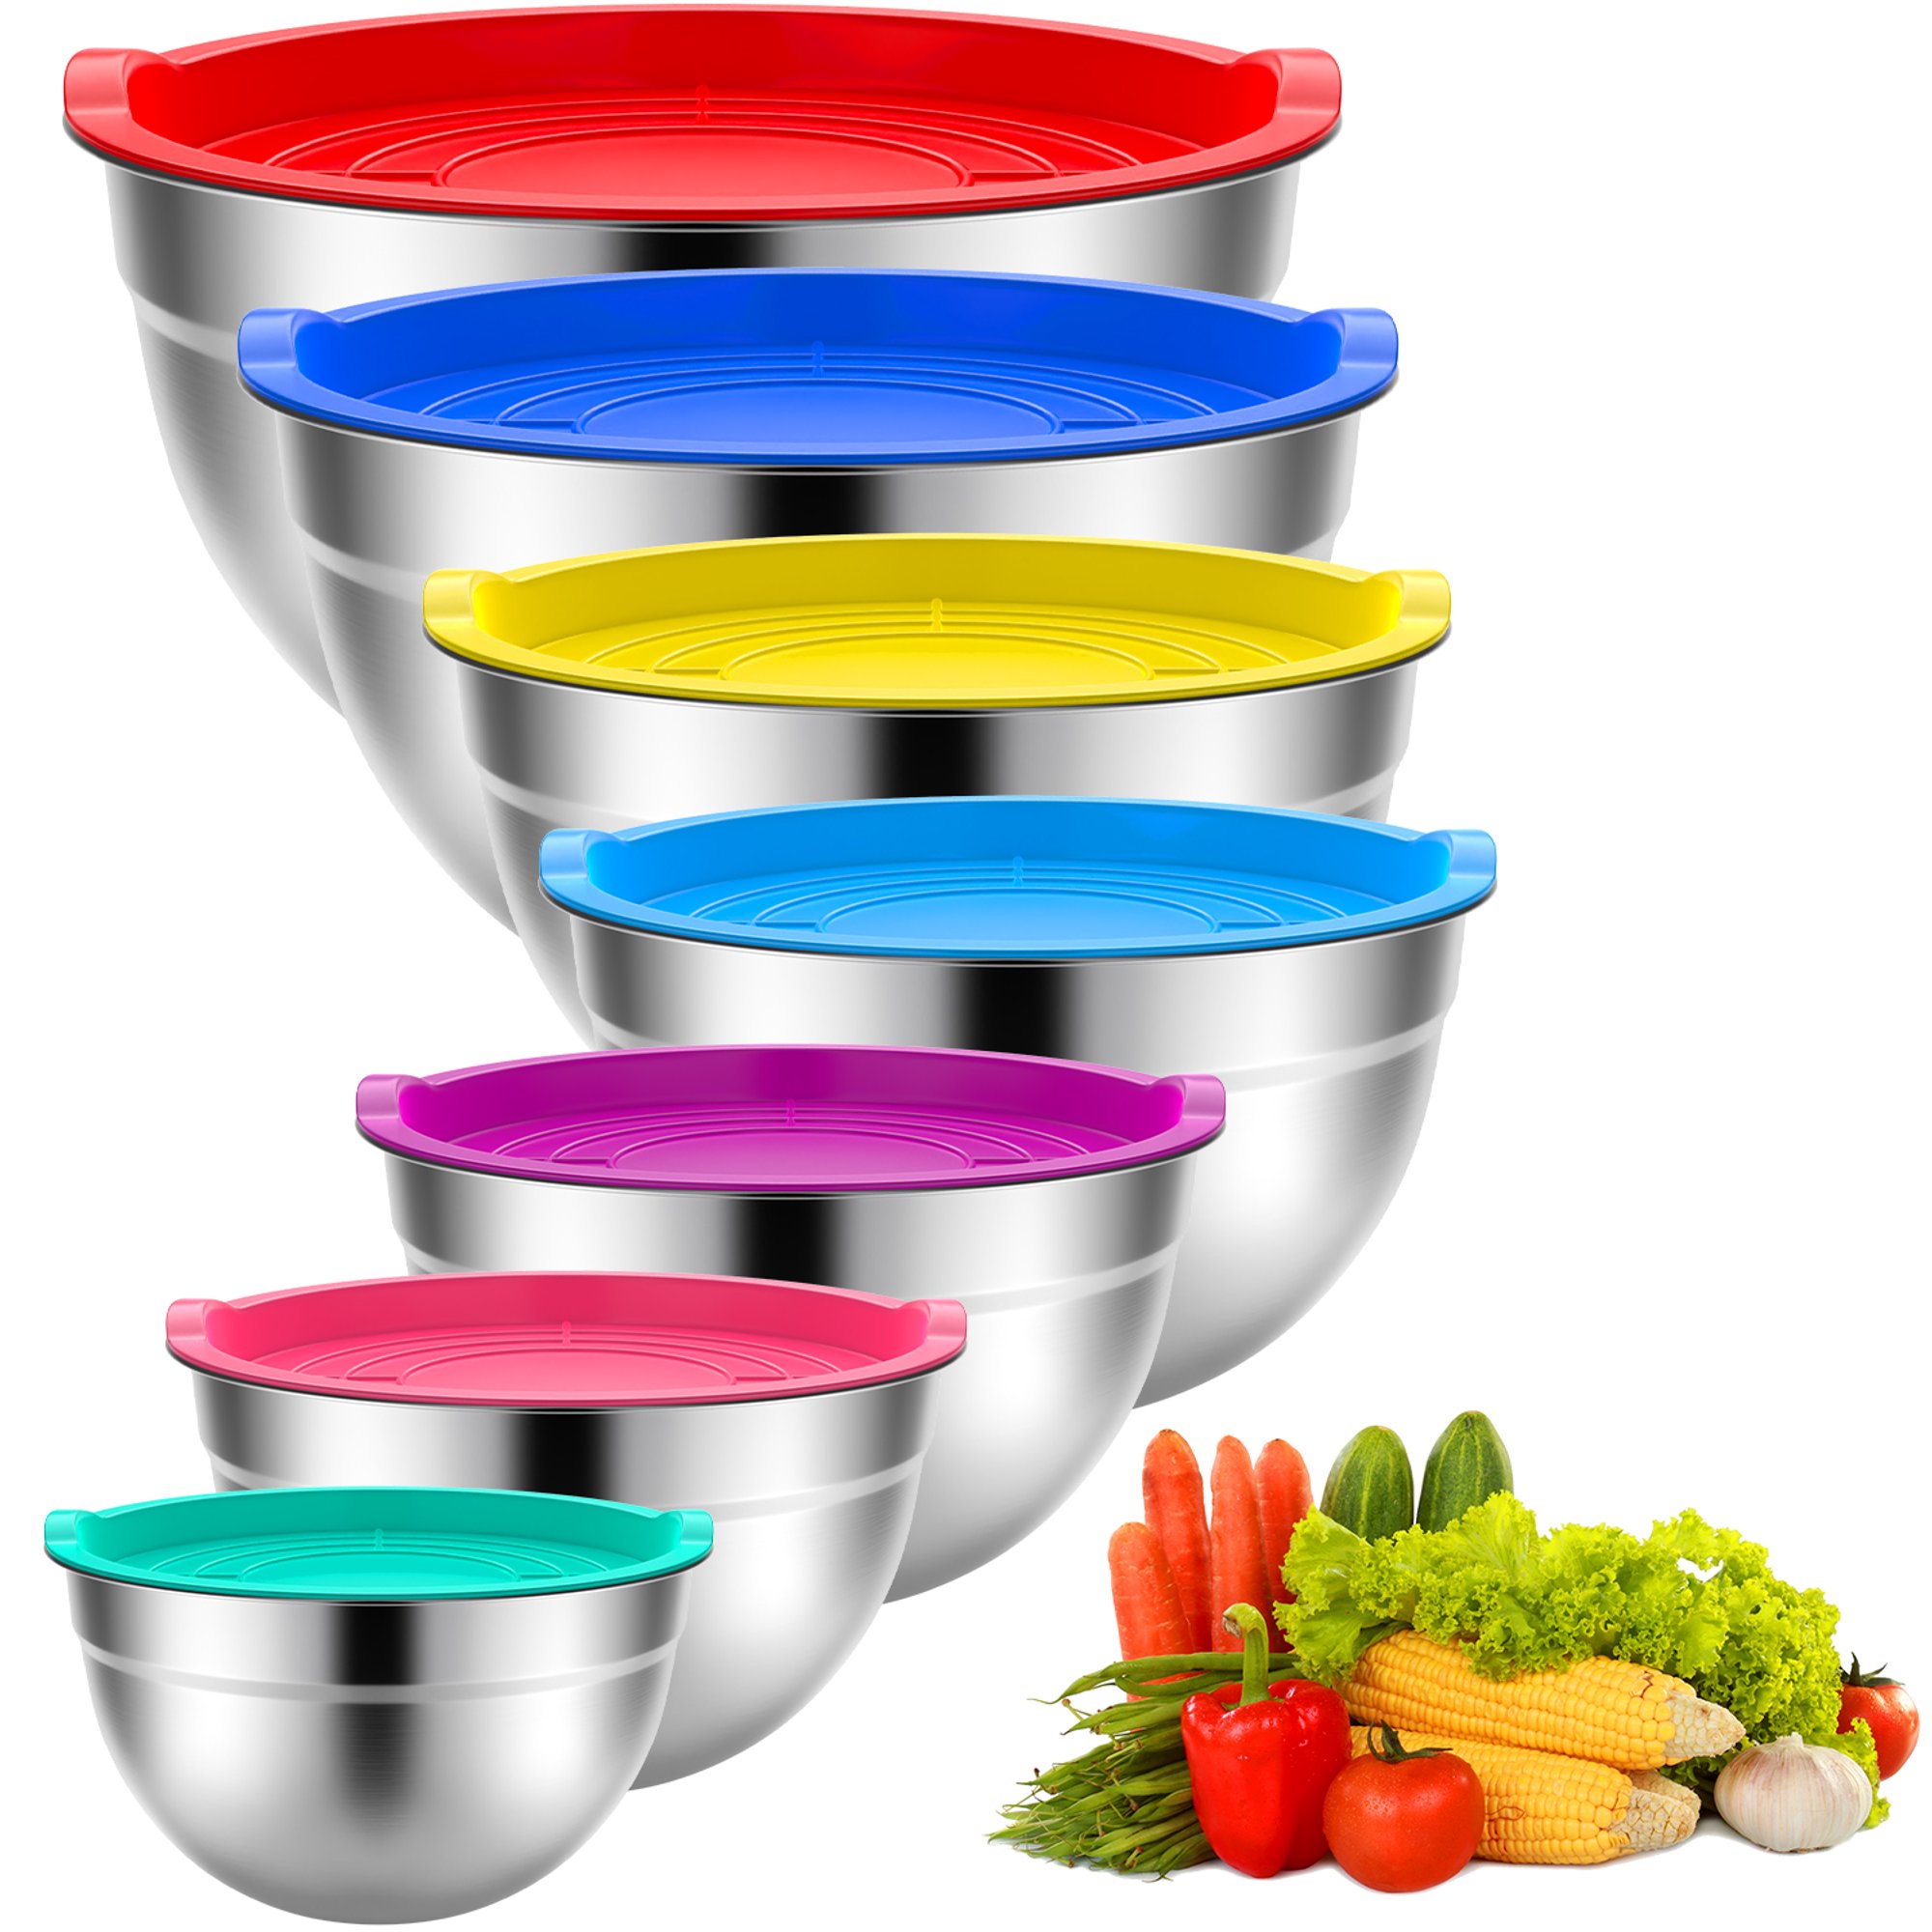 TINANA Mixing Bowls with Lids: Stainless Steel Mixing Bowls Set - 7PCS Metal Nesting Mixing Bowls for Kitchen, Size 7, 4.5, 3, 2, 1.5, 1, 0.7 QT, Great for Prep, Baking, Serving-Multi-Color - image 1 of 7